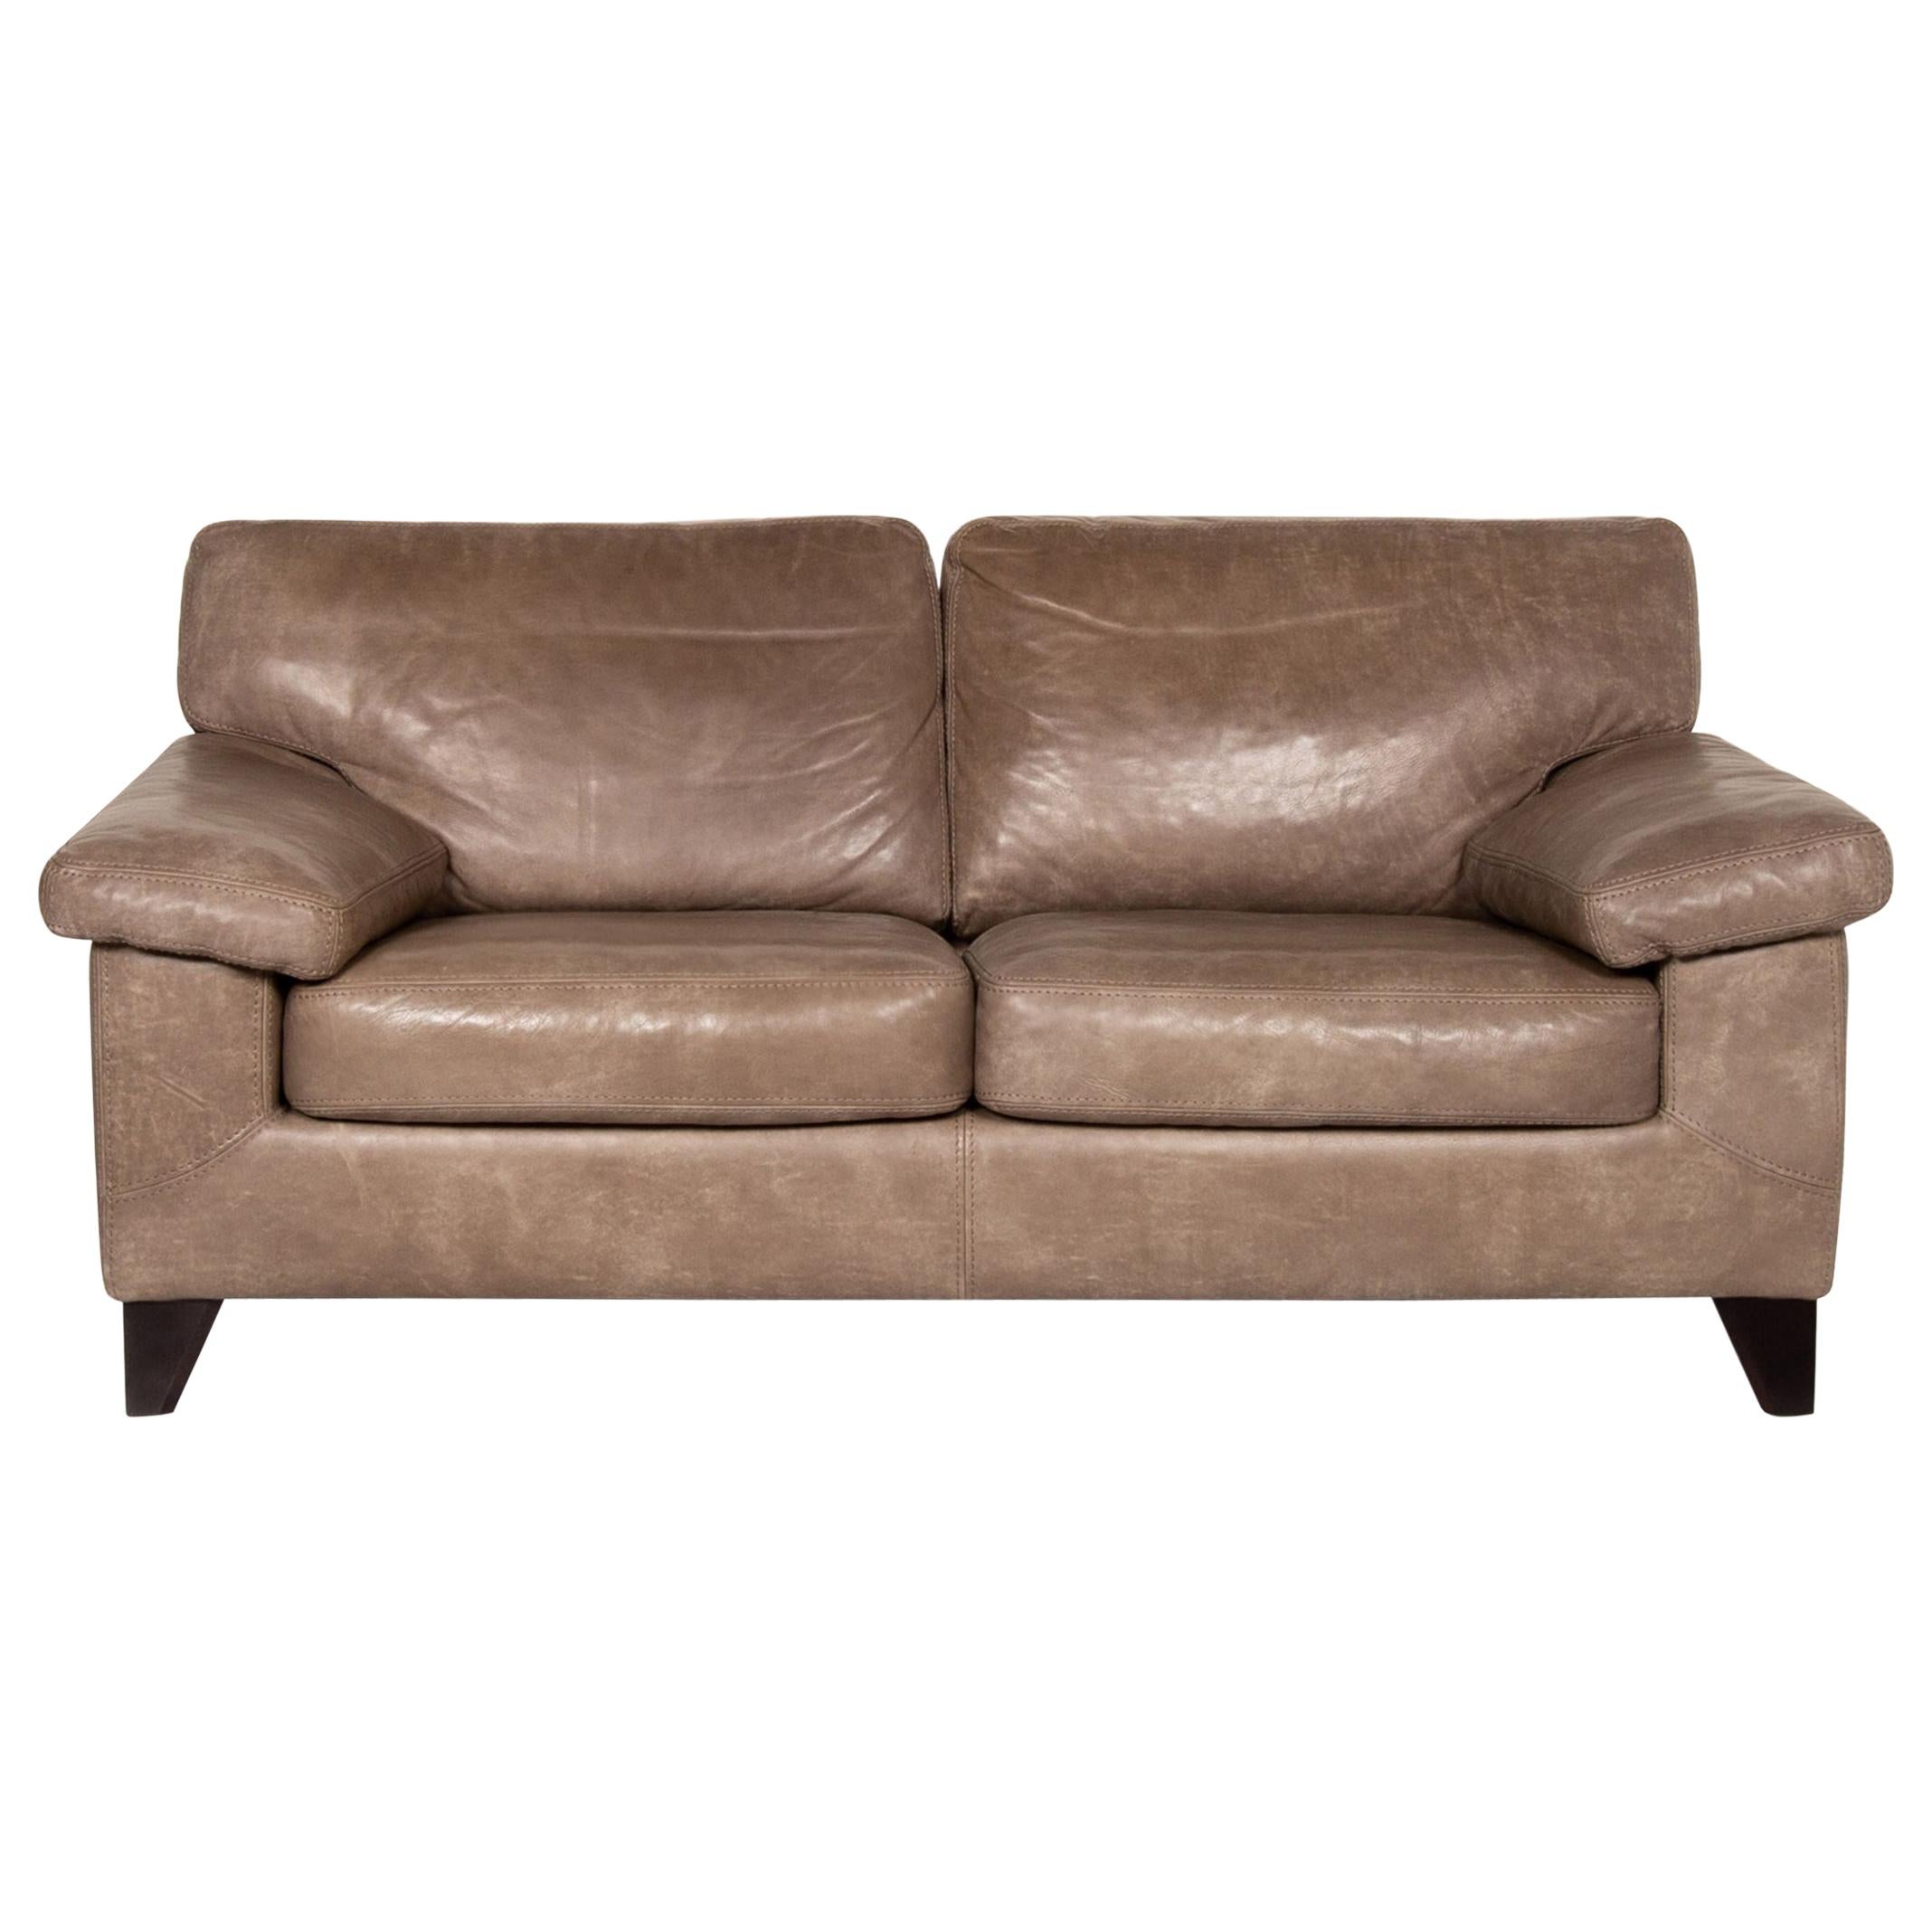 Machalke Diego Leather Sofa Brown Two-Seat Couch Teun Van Zanten For Sale